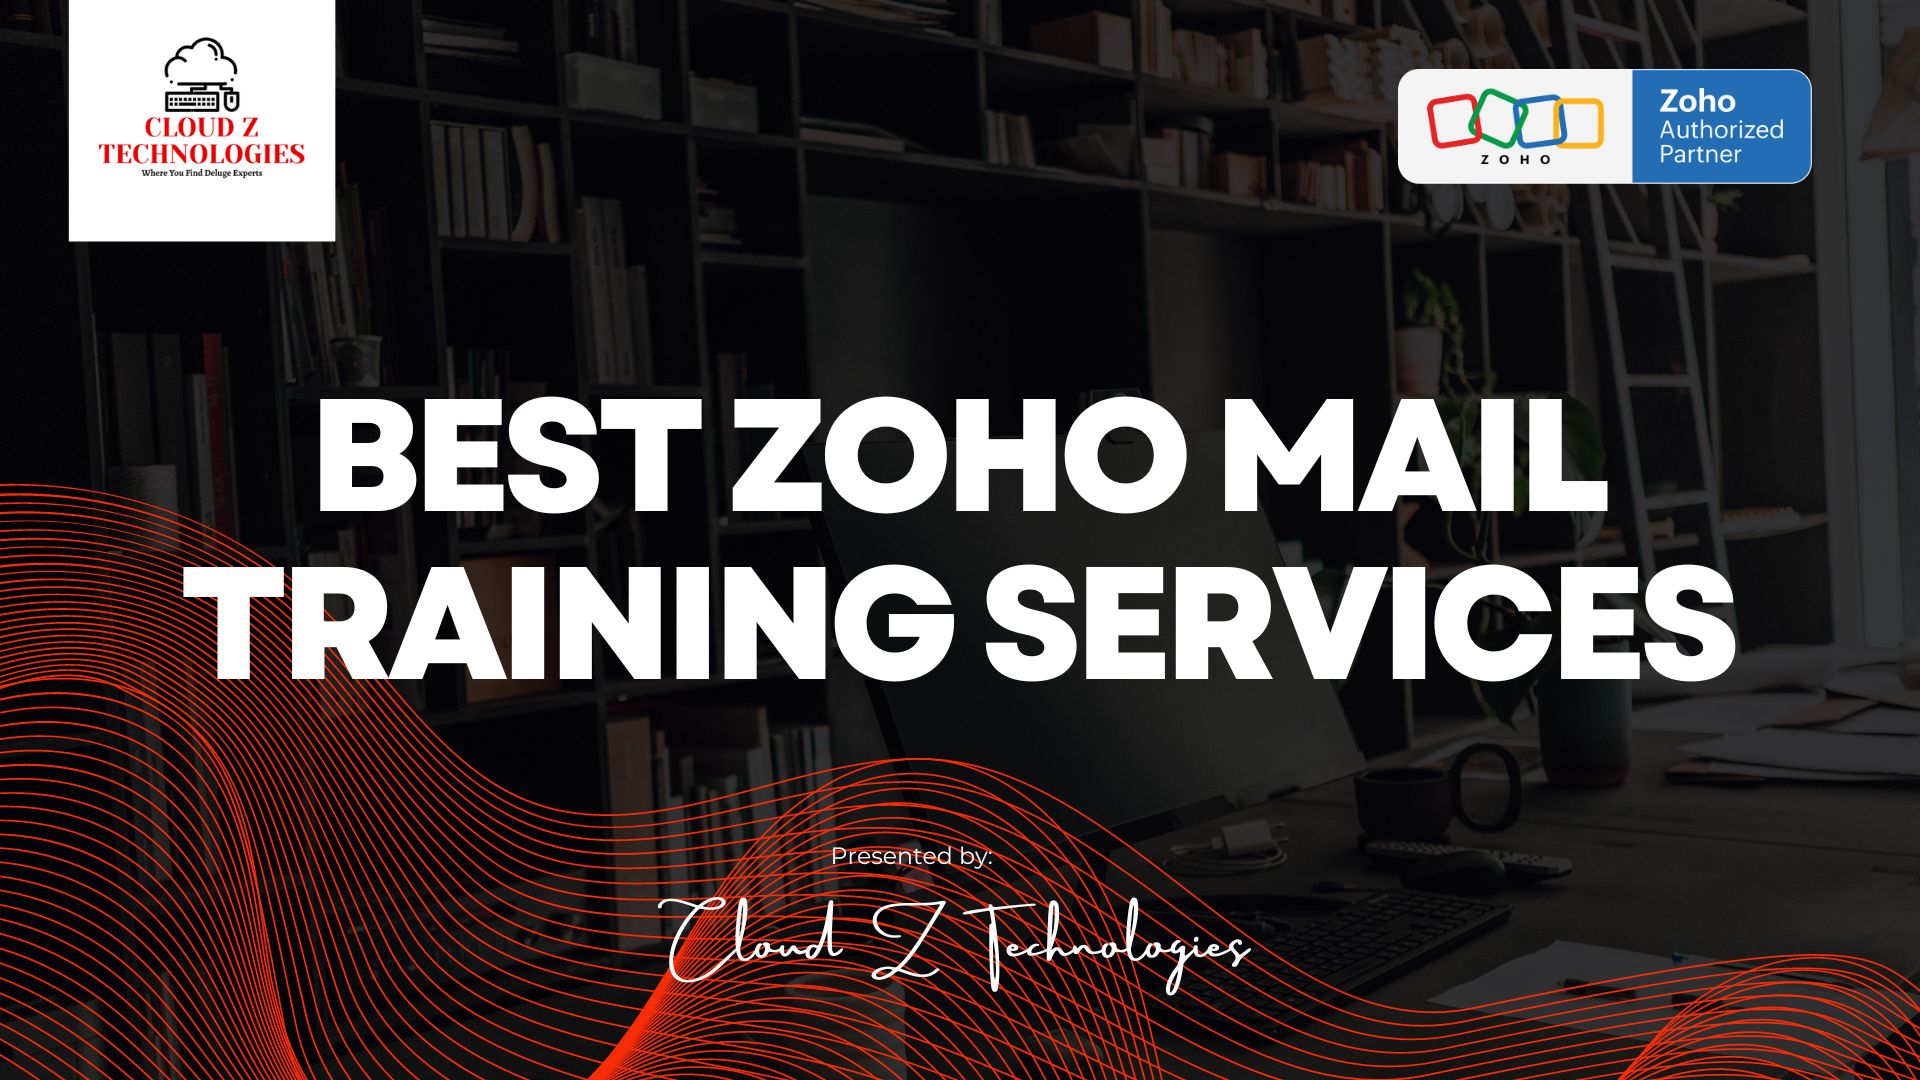 Zoho Mail training services